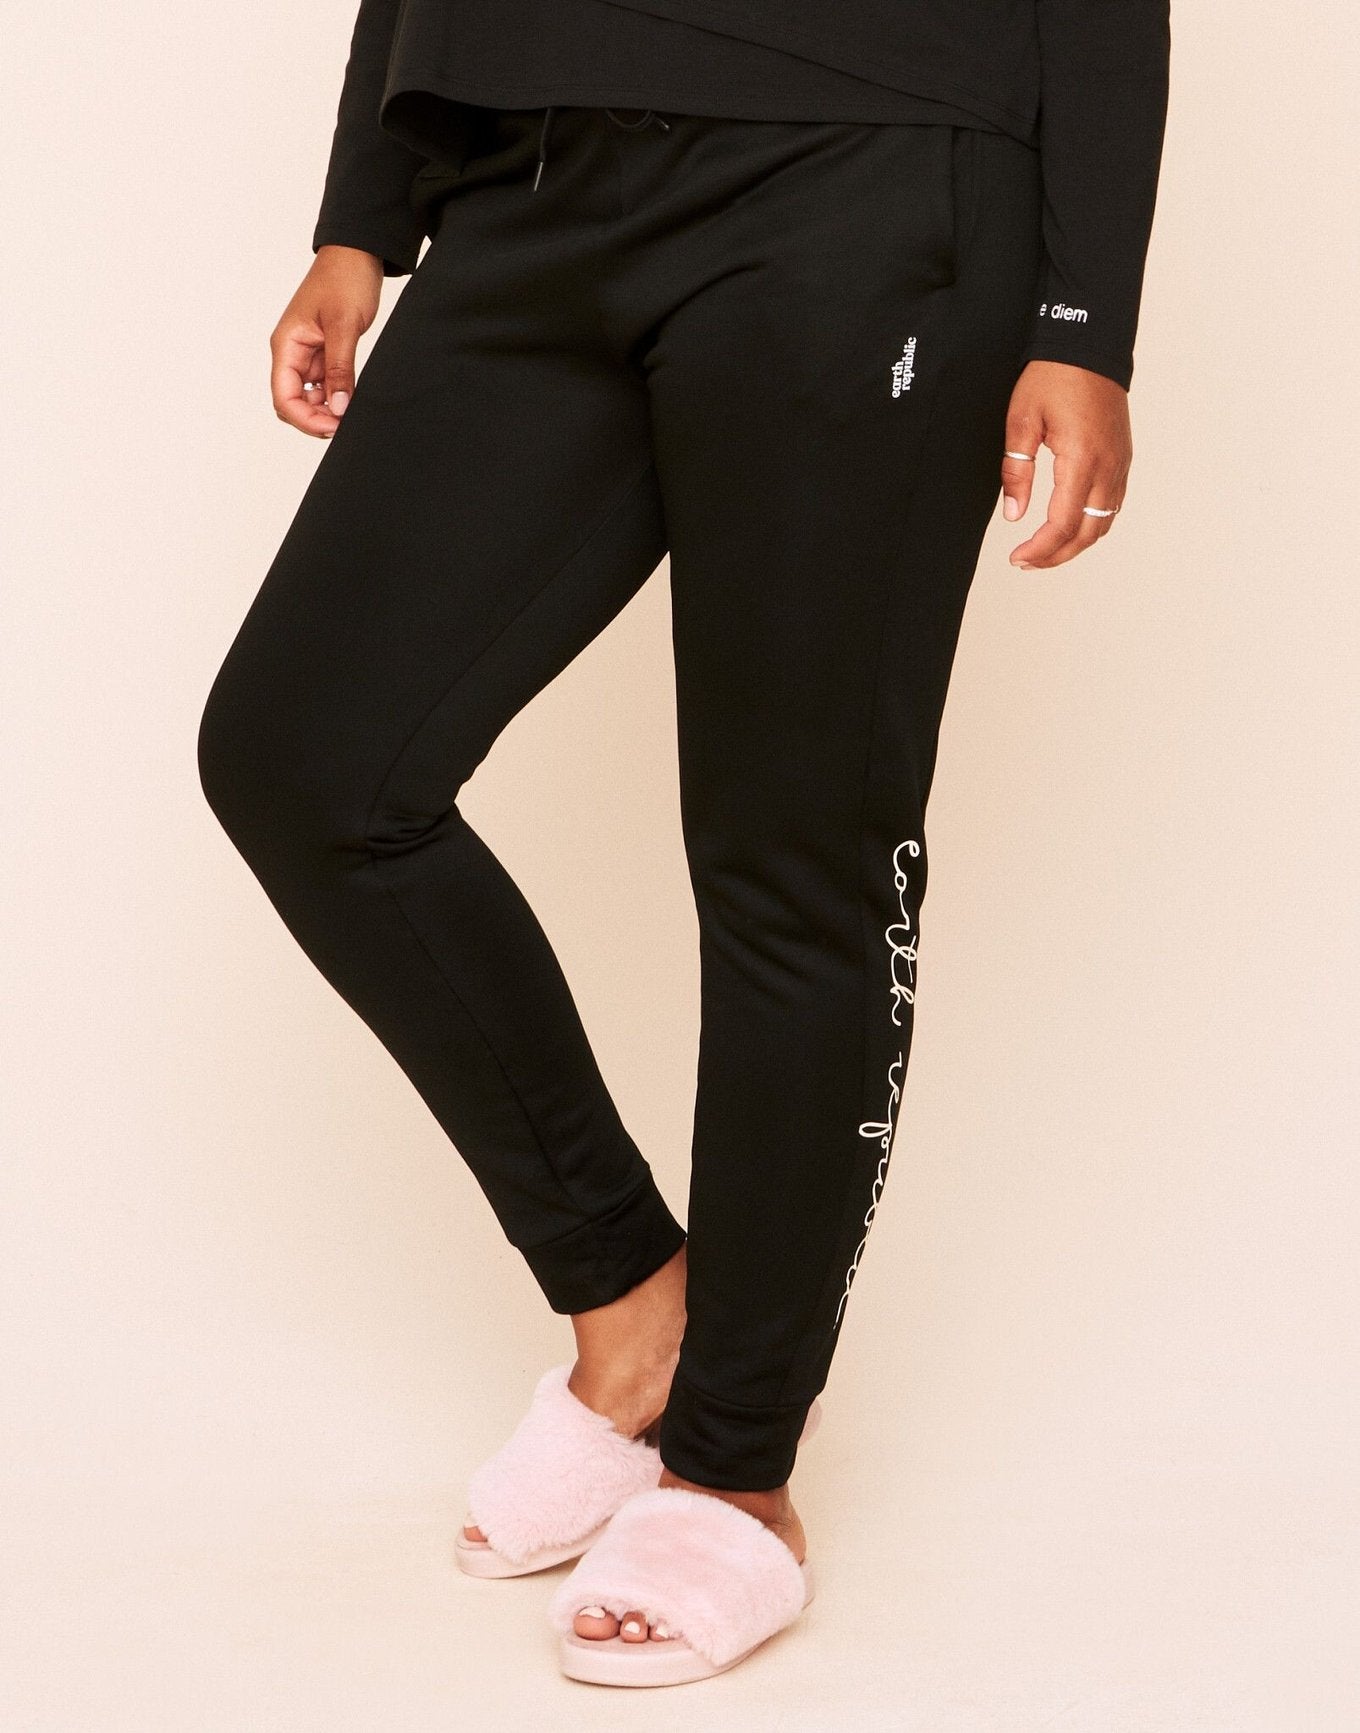 Earth Republic Shawn Jogger Pant Joggers in color Jet Black and shape jogger